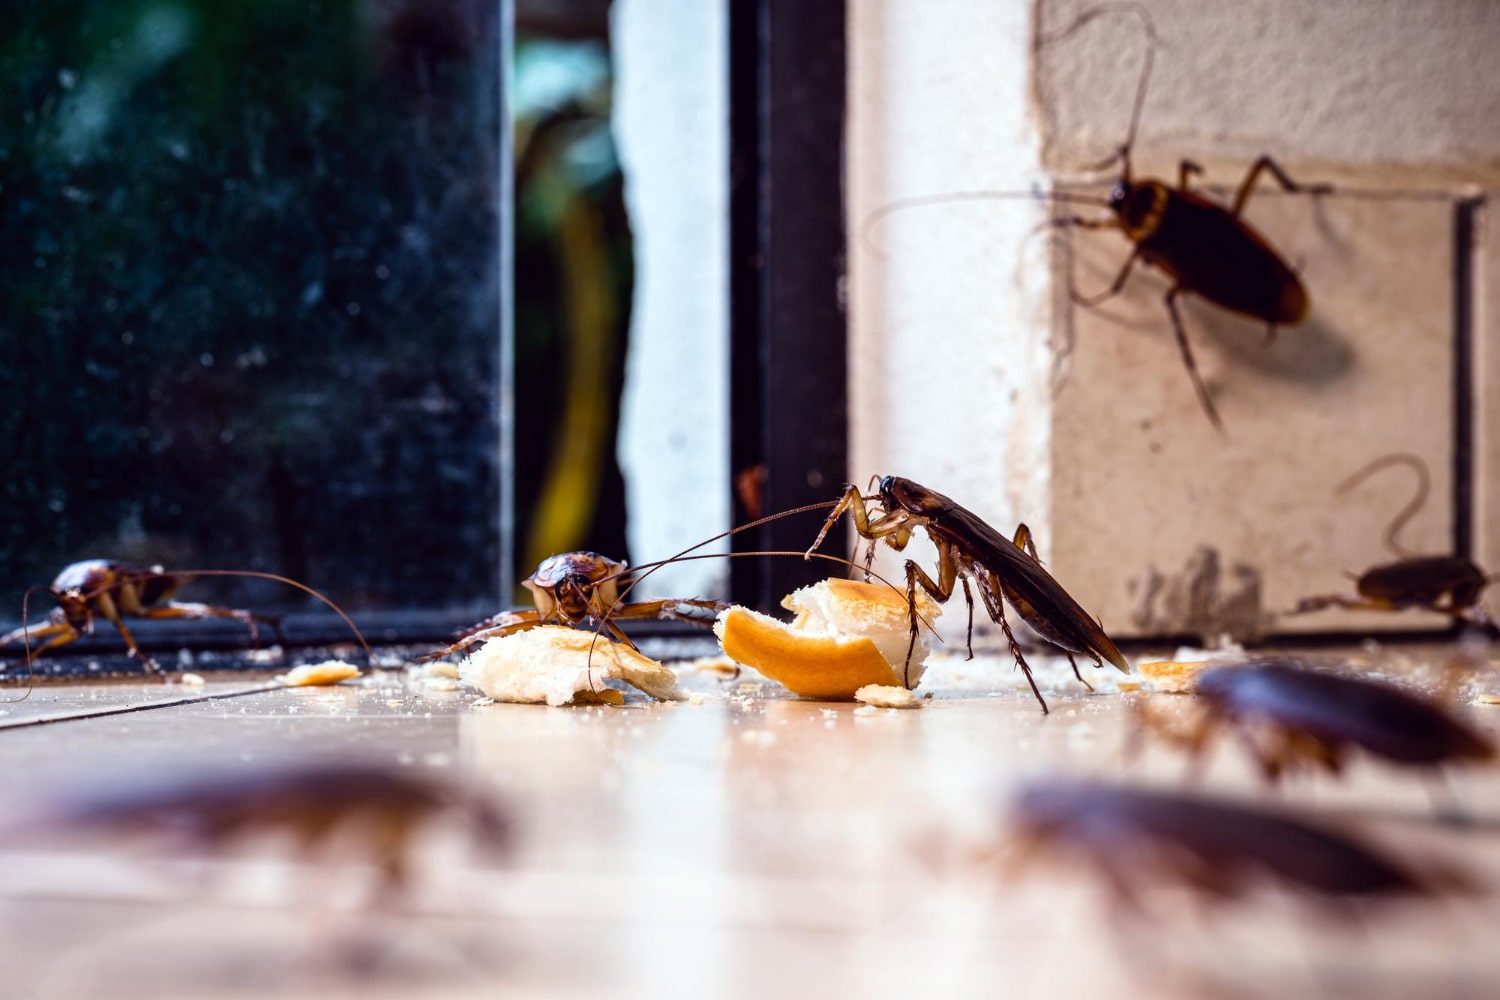 A Complete Guide to Keep Cockroaches Out of Your Apartment - Life After Bugs